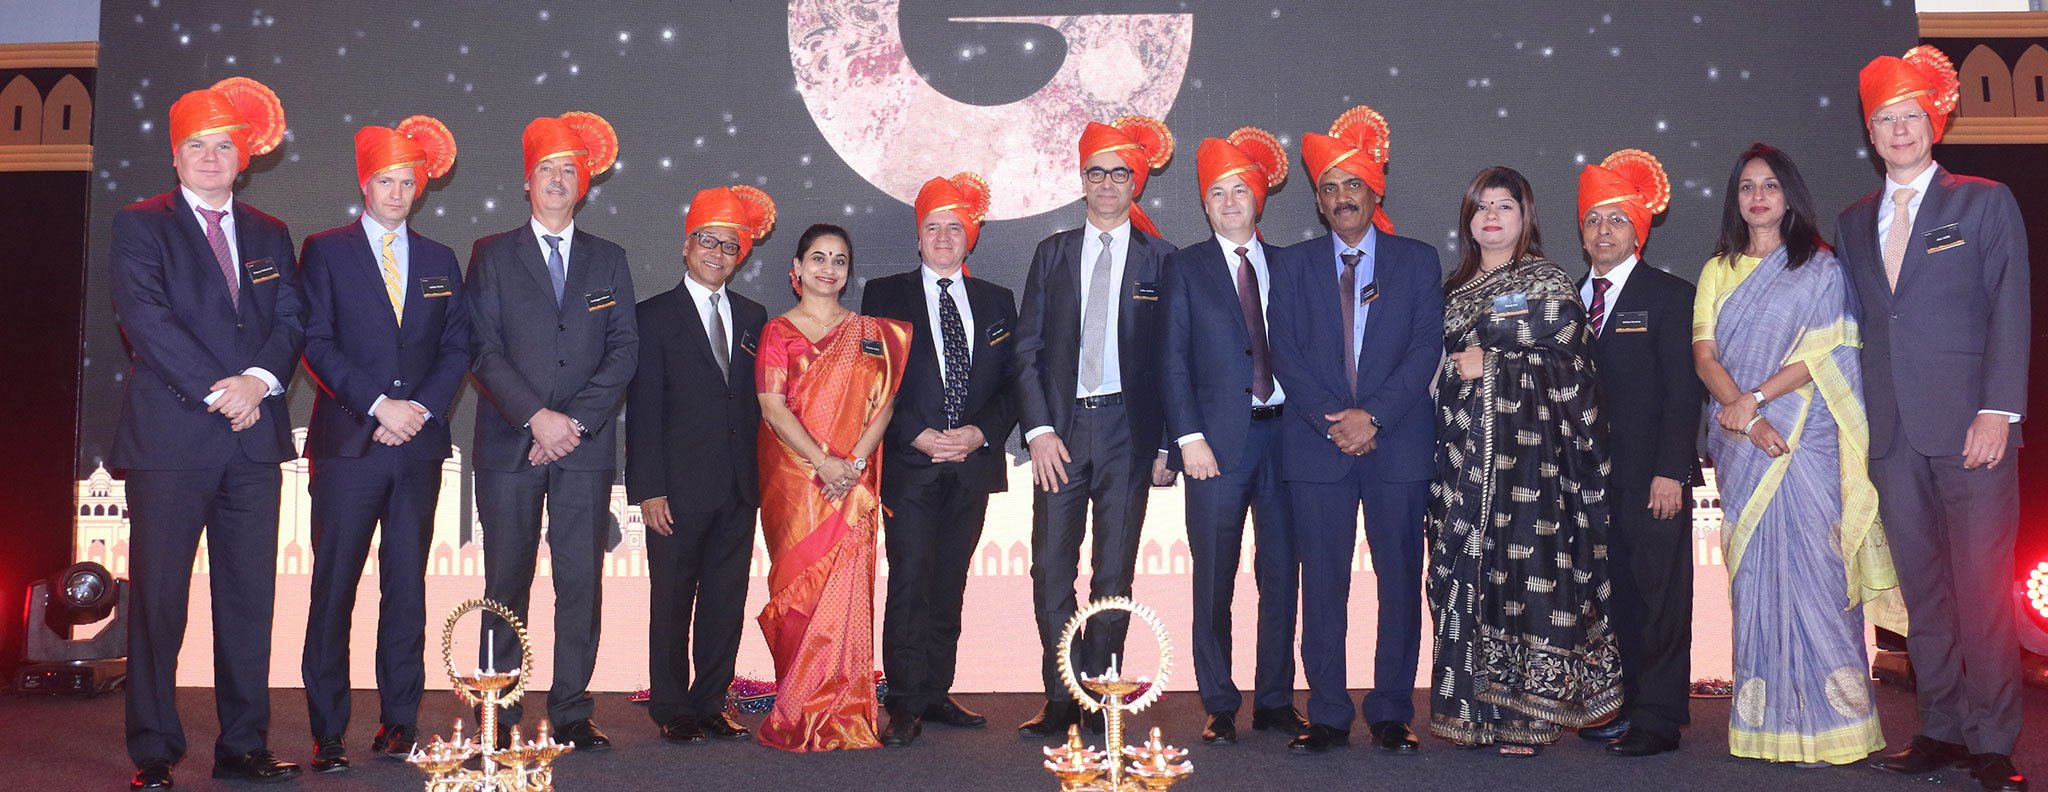 Inauguration ceremony opening Flavours facility in Pune, India